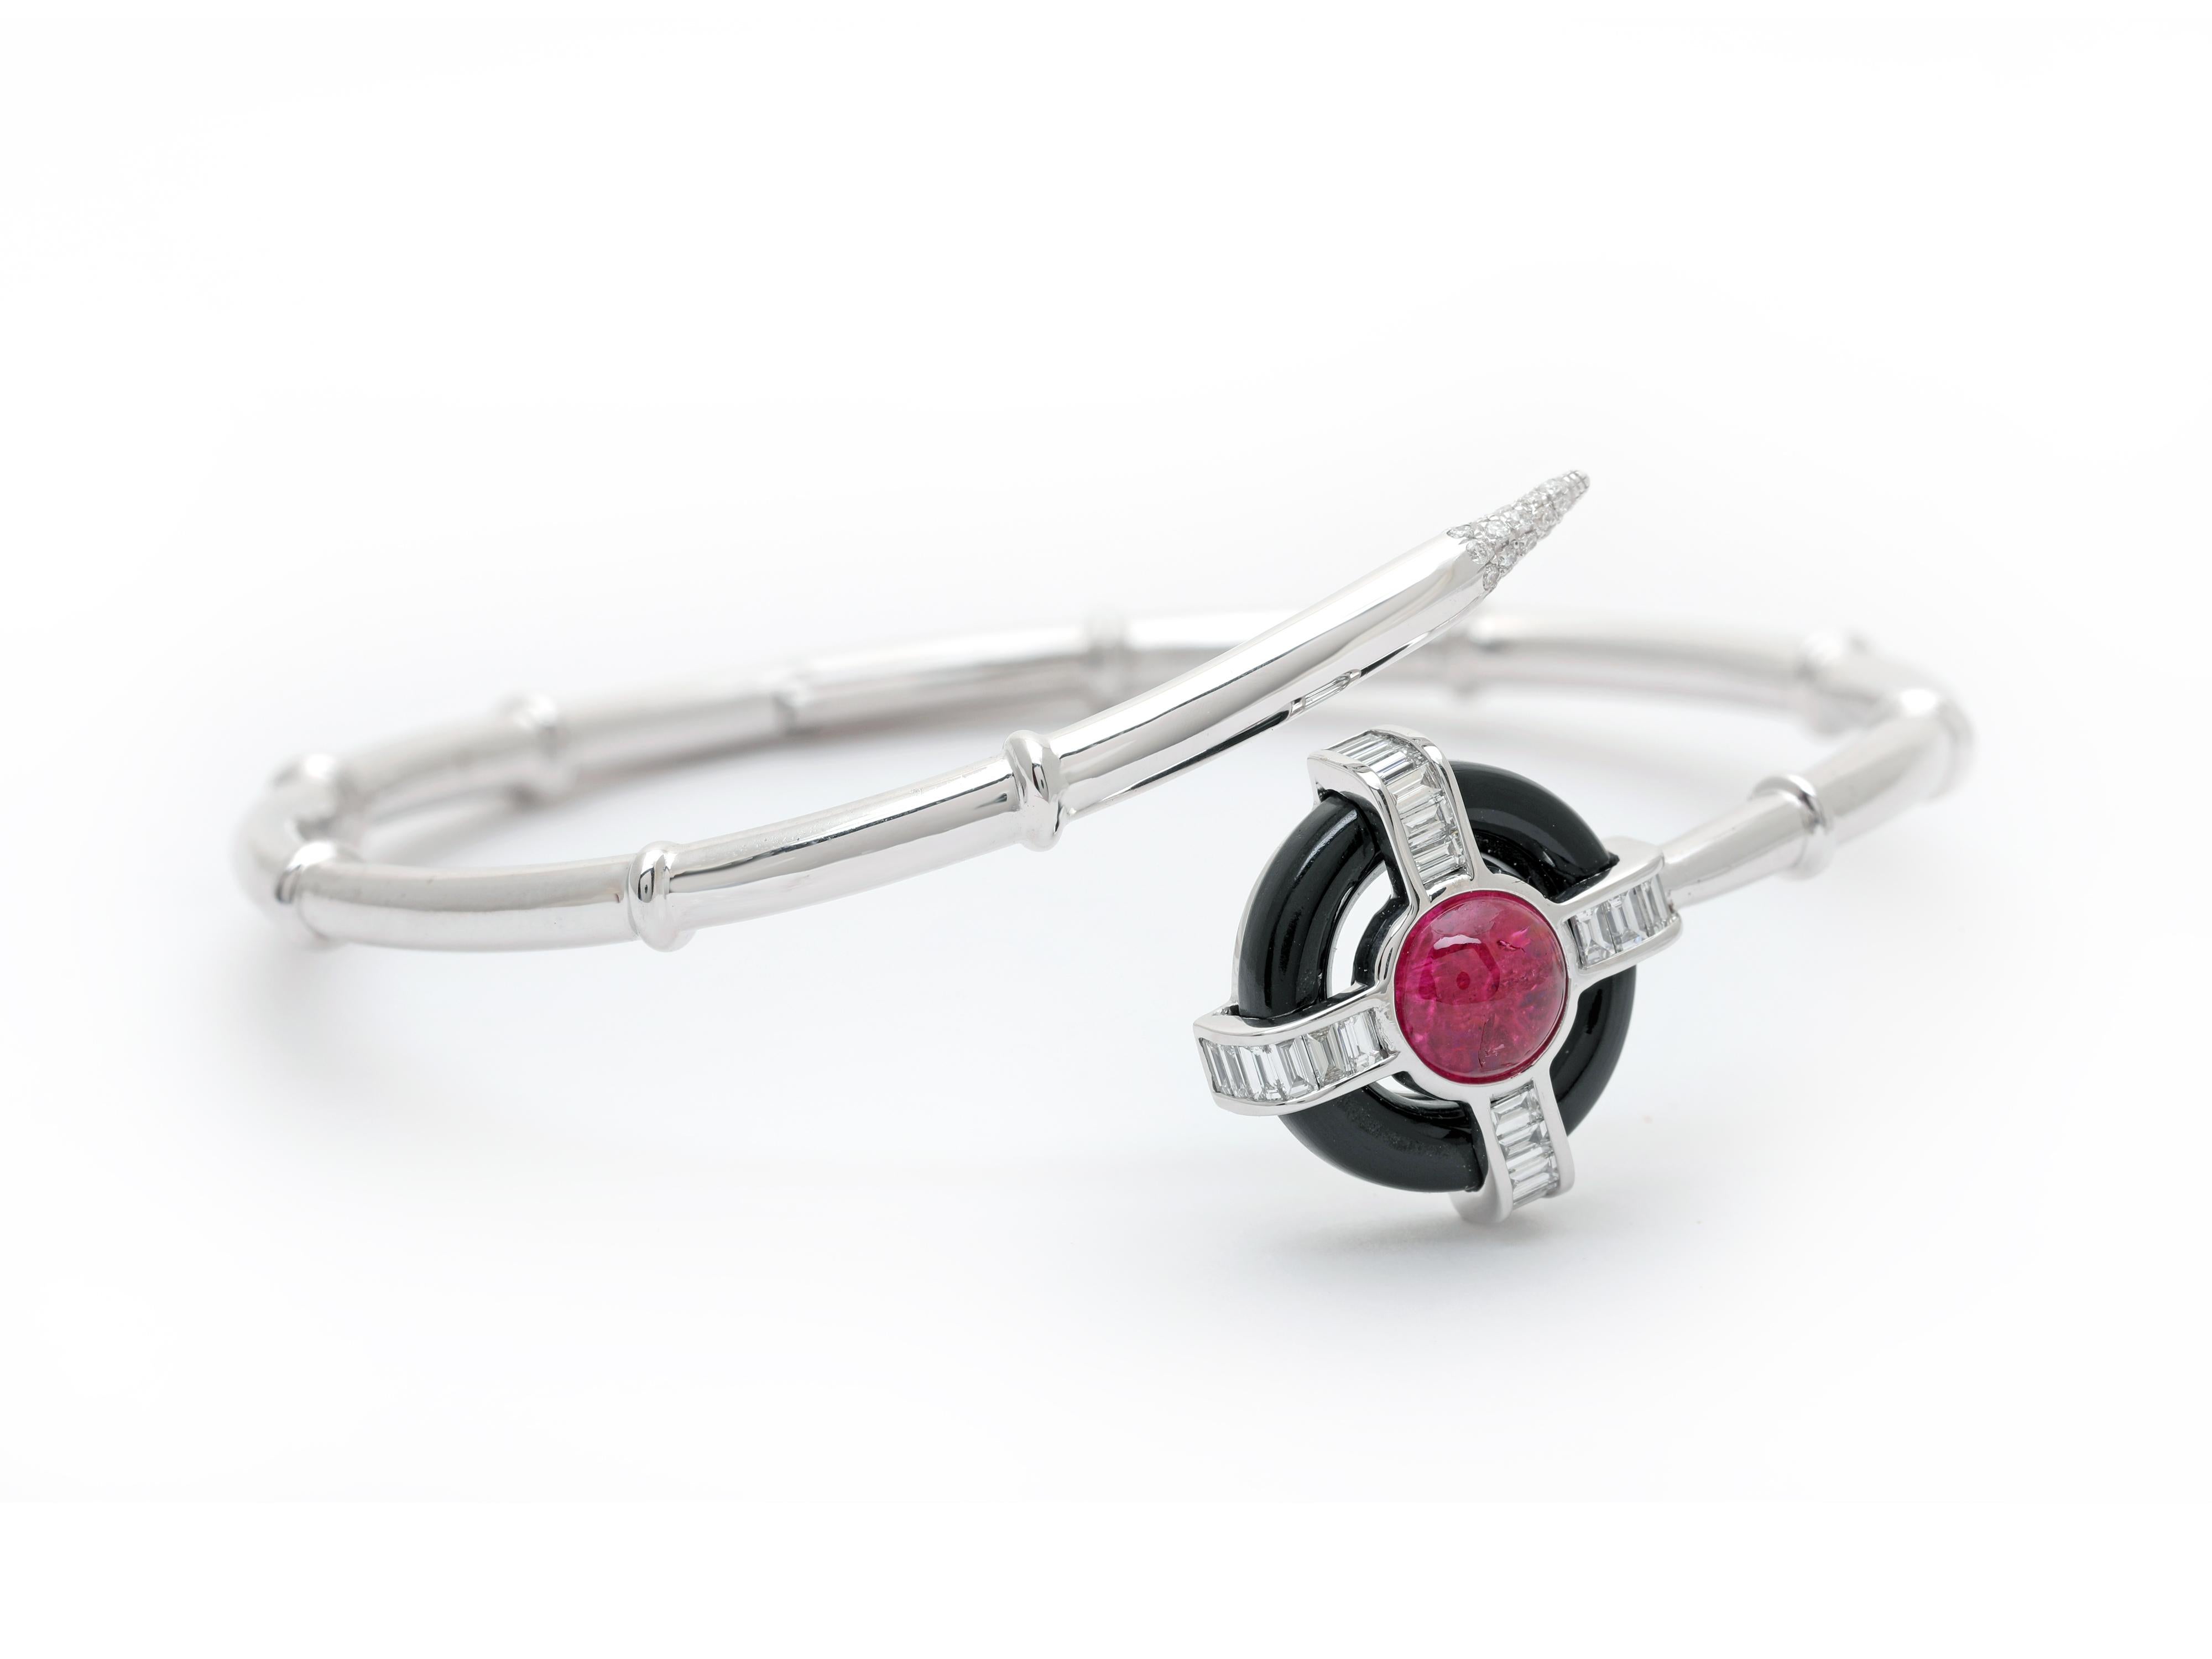 Contrasting colours and a mix of clean lines and smooth curves merge to create the distinctive look of Atelo’s Deco Wheel Collection.

This deco-inspired bangle combines black onyx, baguette (rectangular) diamonds and rubellite to create a striking